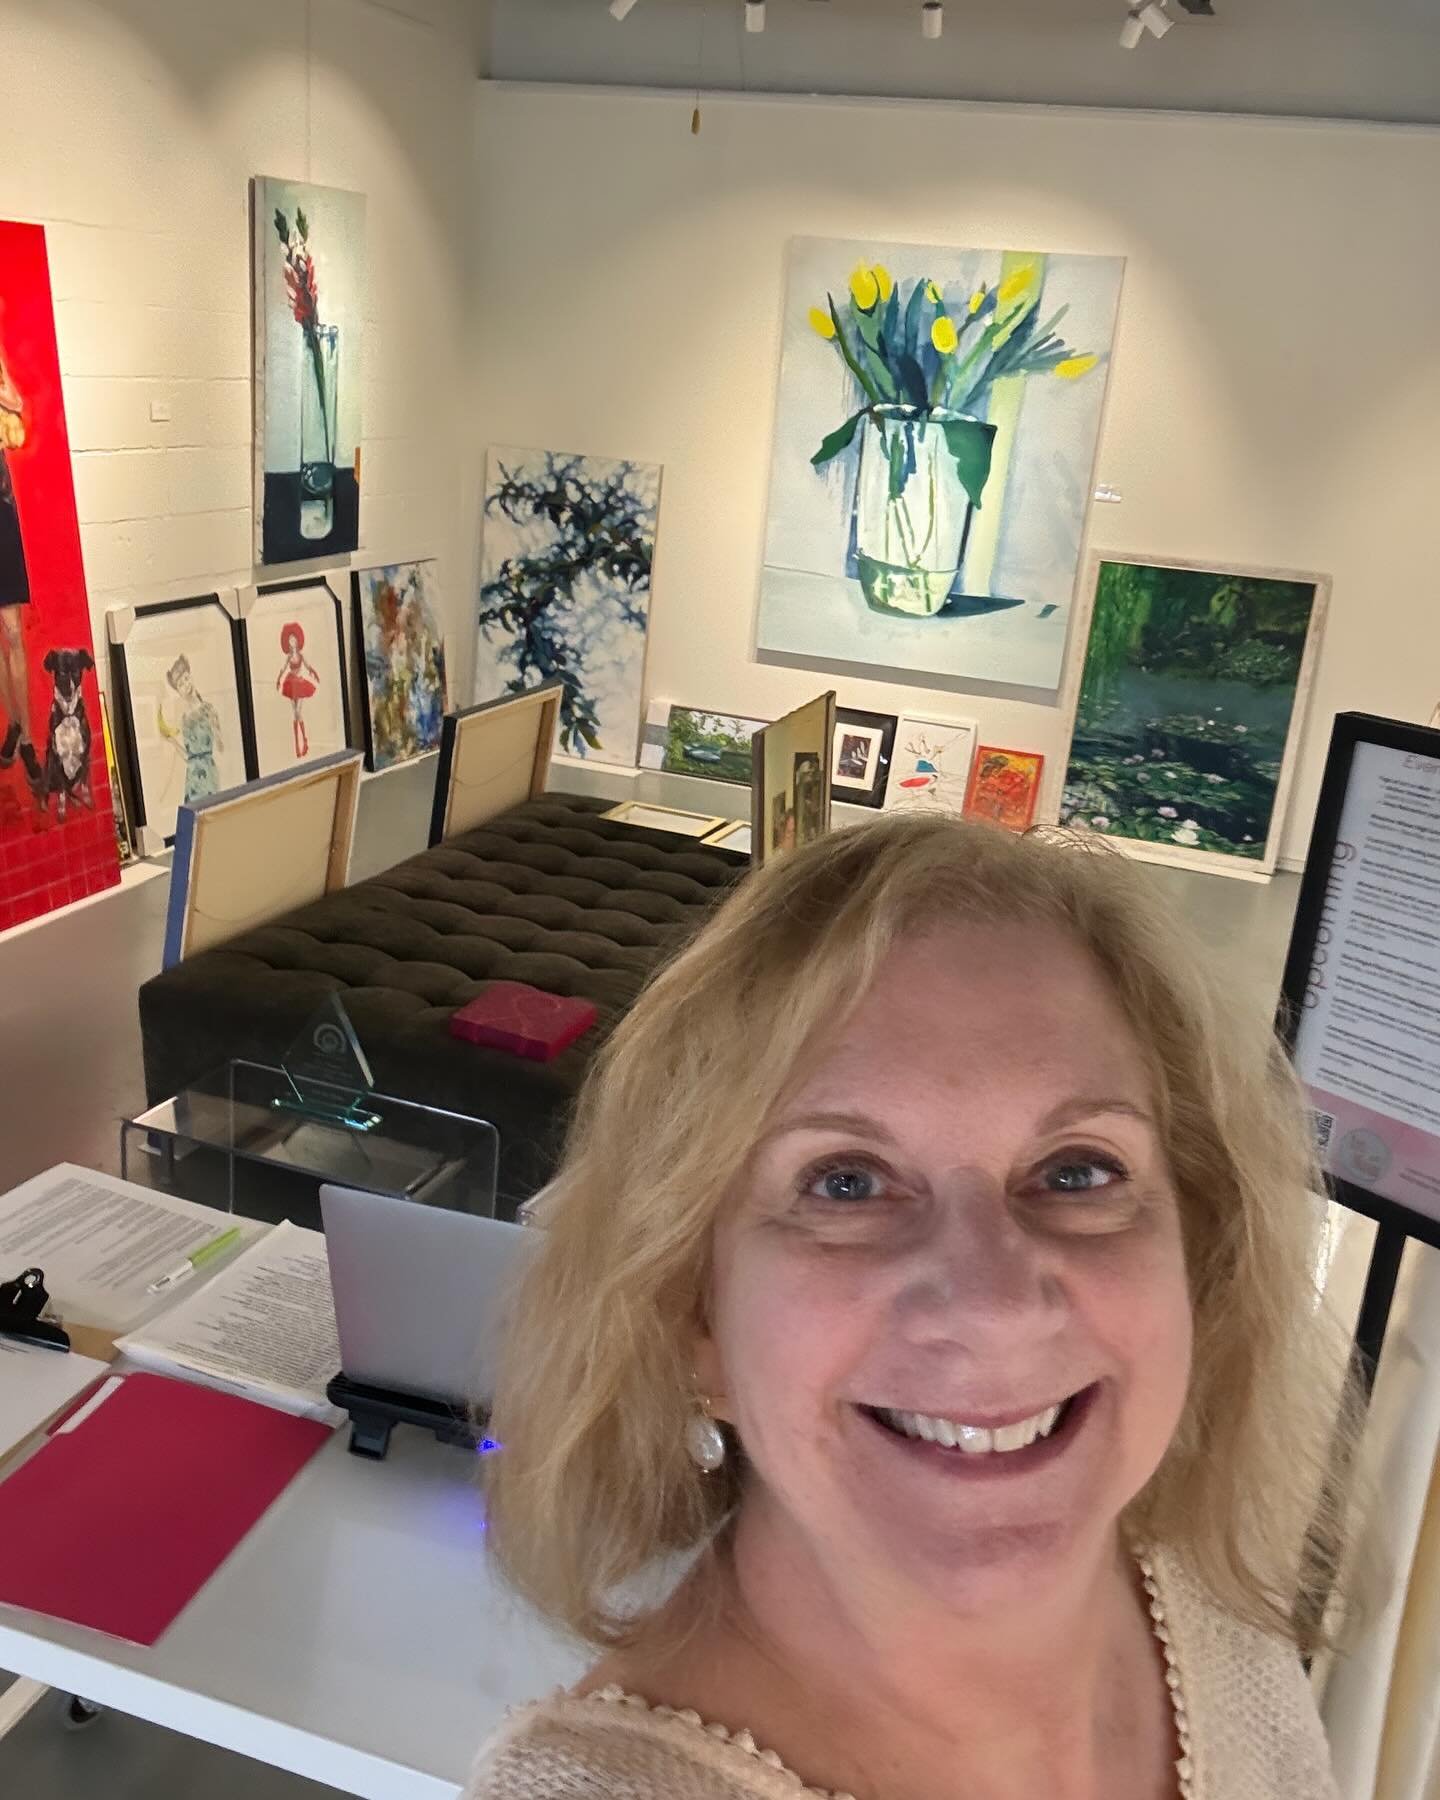 Second day of art drop off for the Women in Art a Joyful Journey exhibition! Each piece is taking our breath away! @katherinebaronetartistdallas @dallasculture